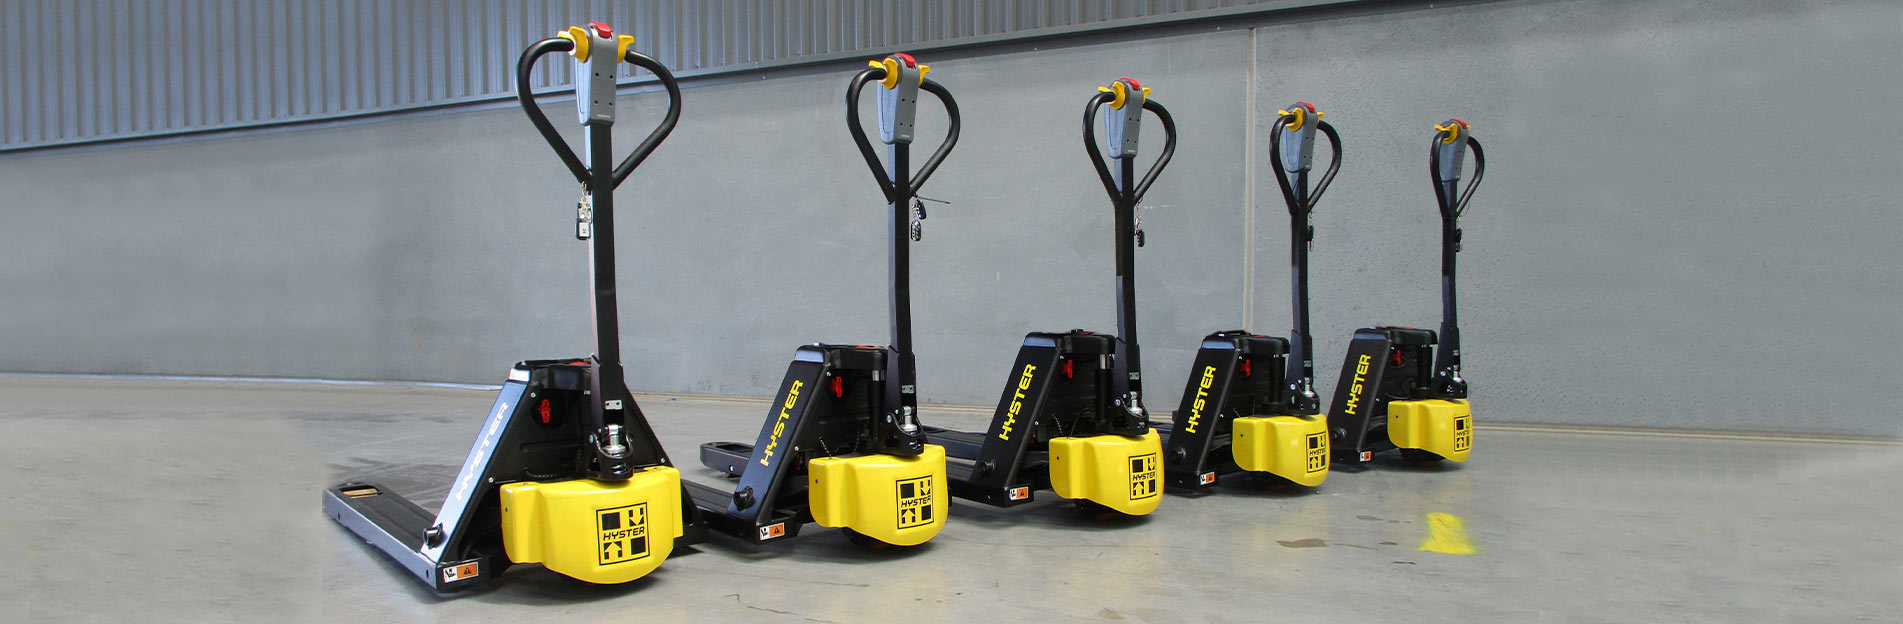 Hyster PC1.5 Lithium-Ion Pallet Jack